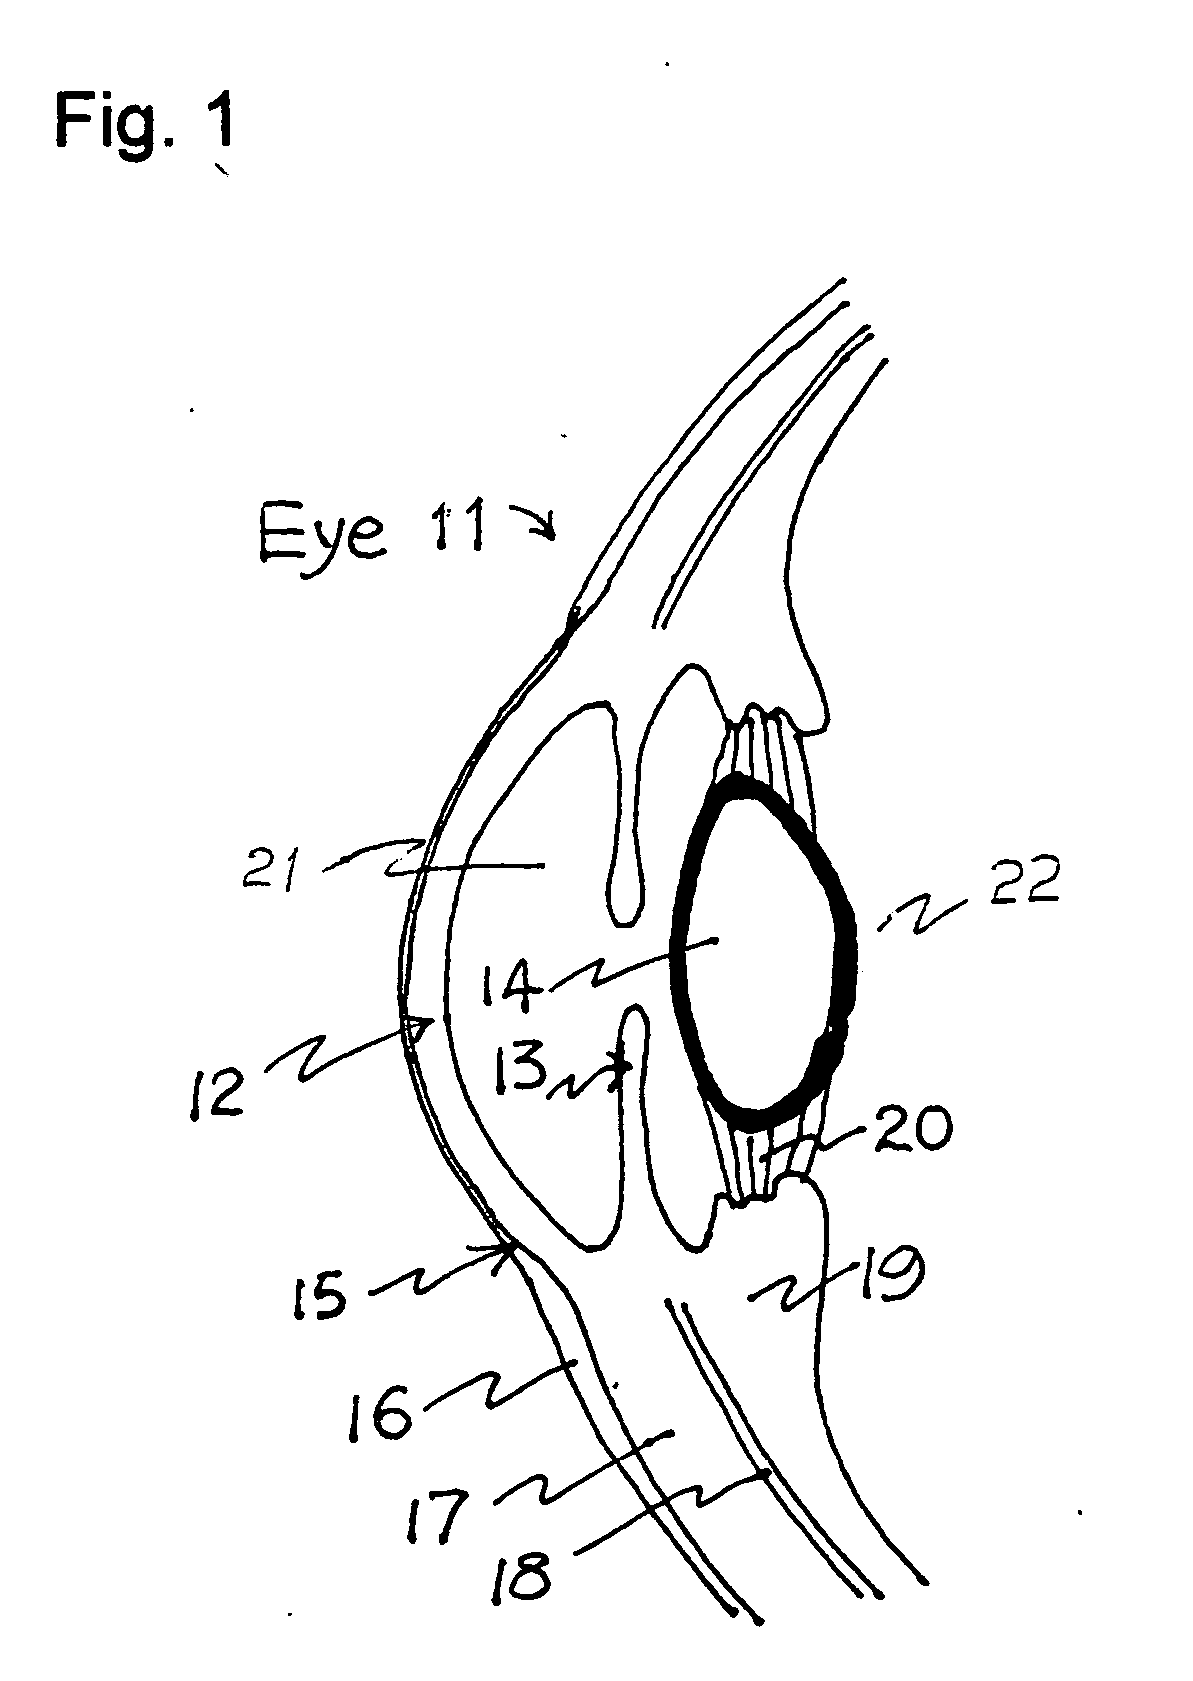 Method and system for non-invasive treatment of hyperopia, presbyopia and glaucoma